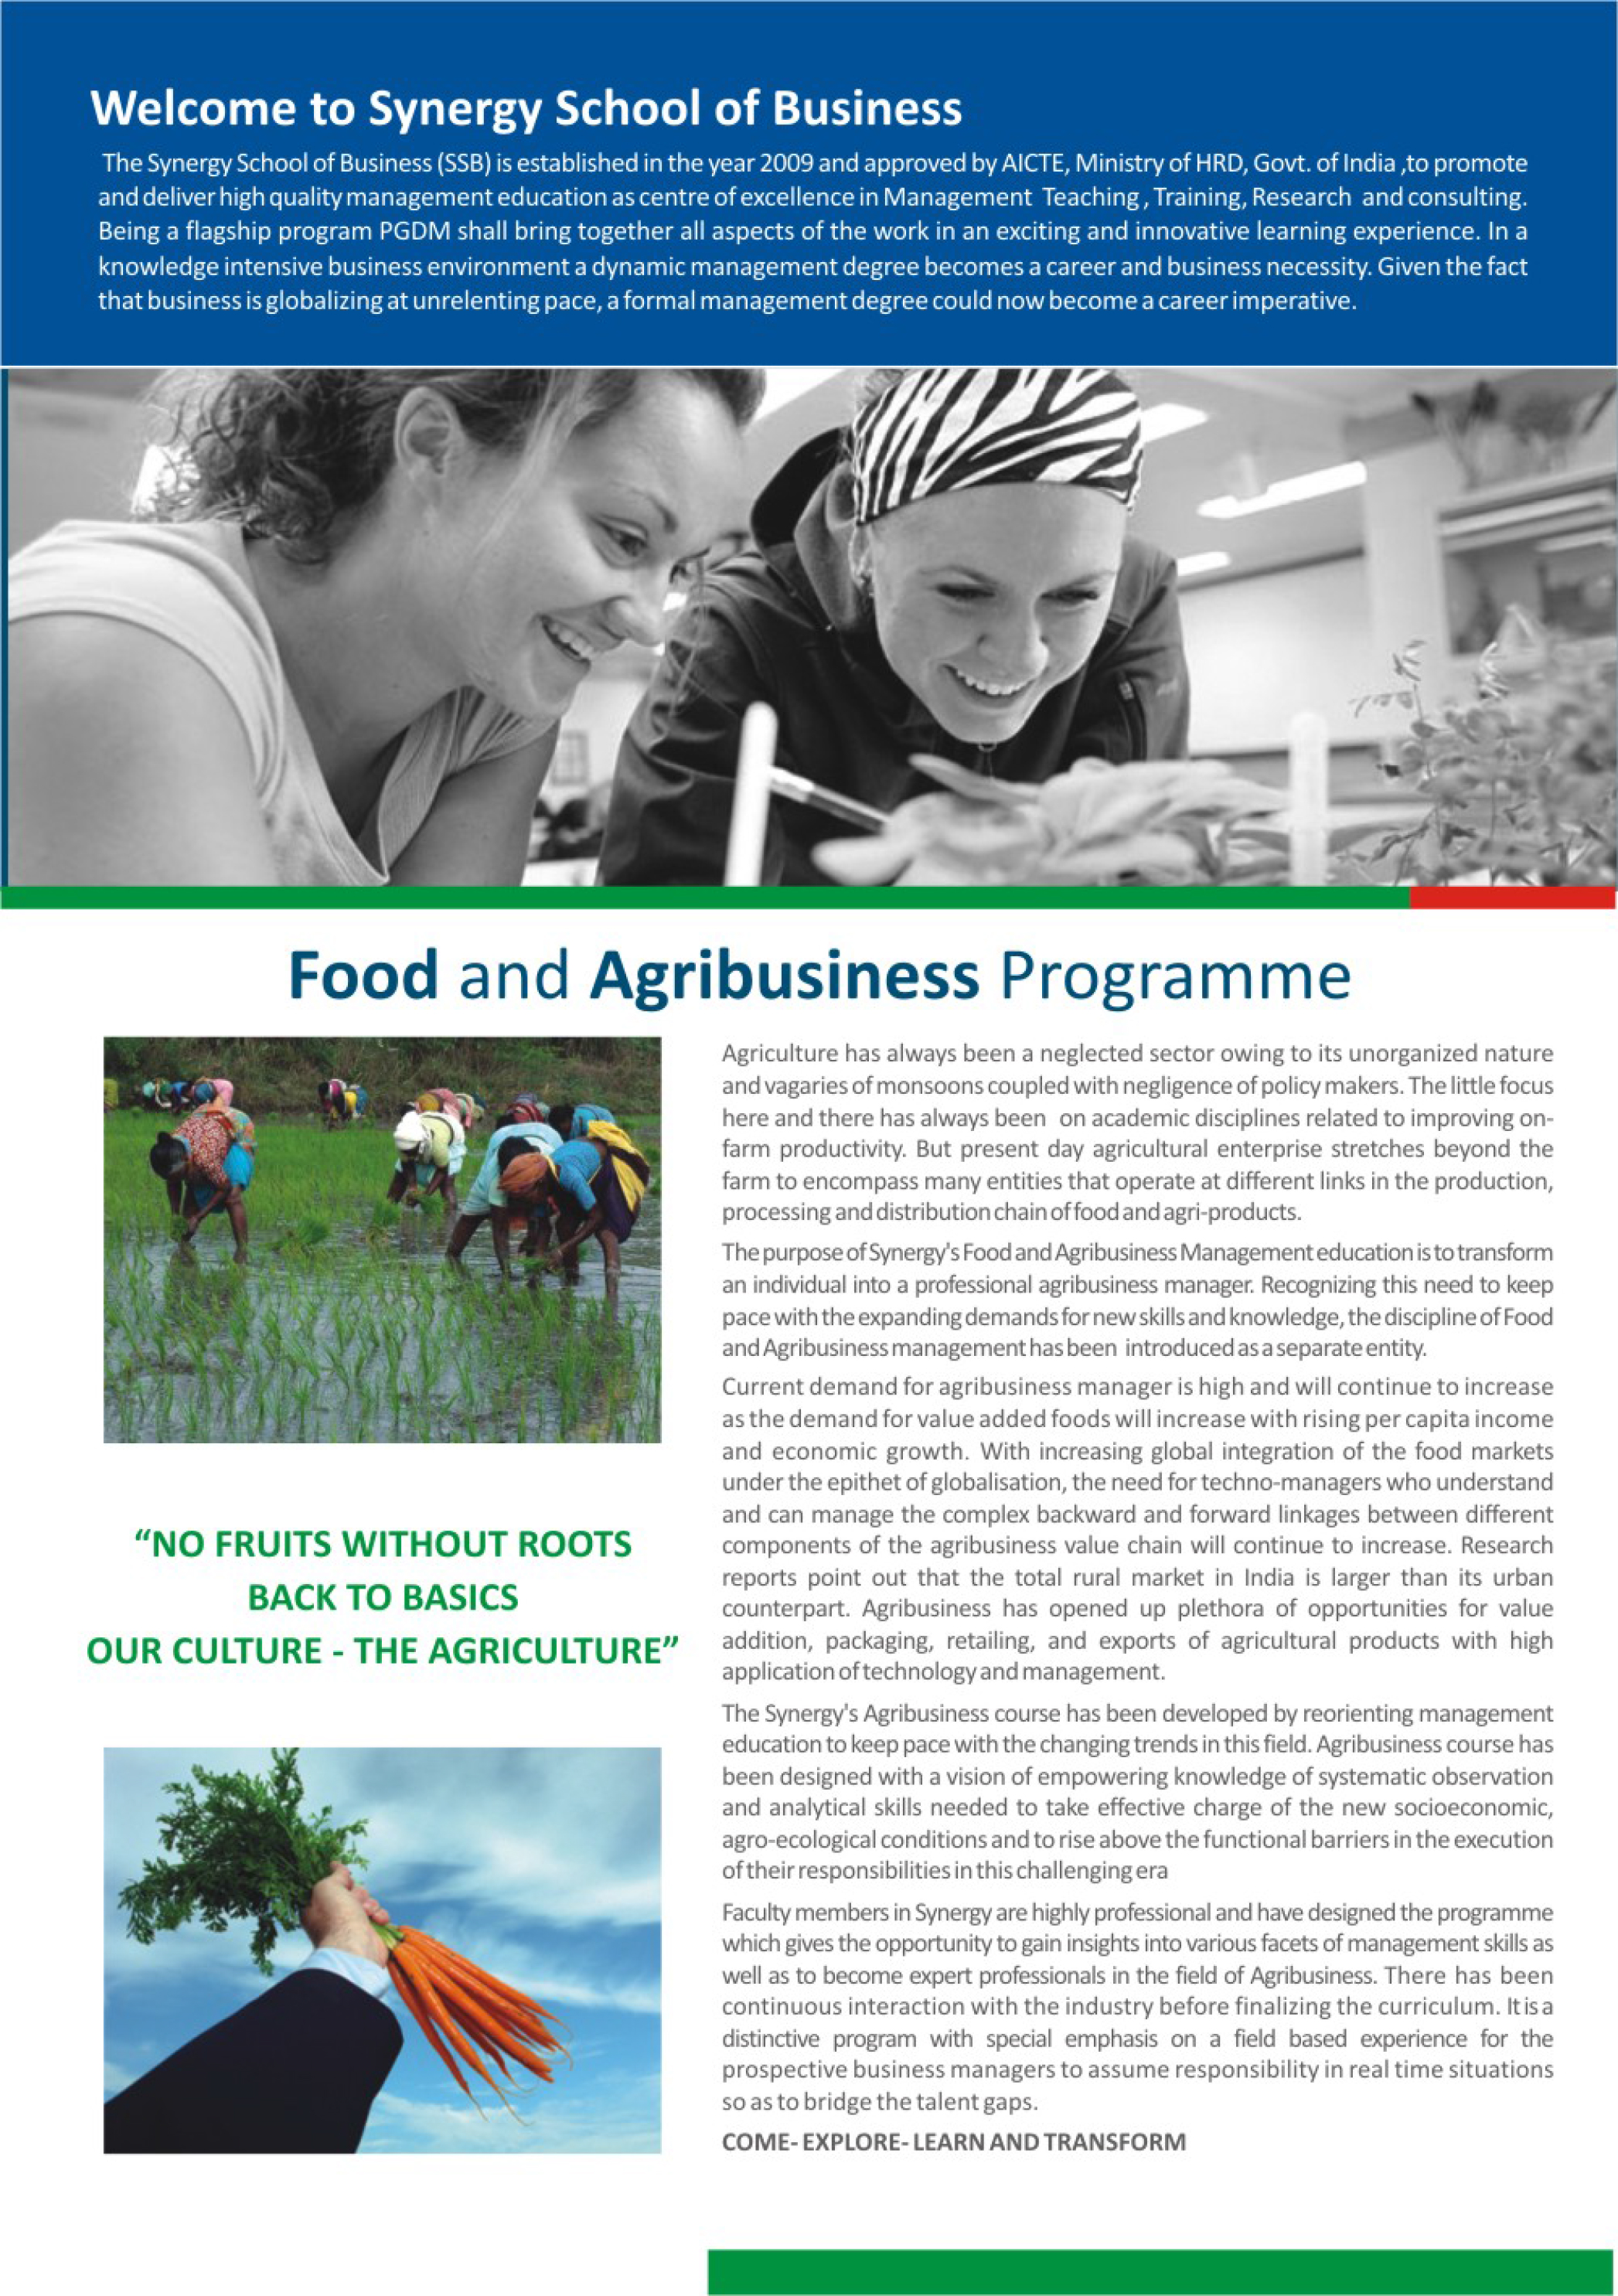 Food-and-Agribusiness